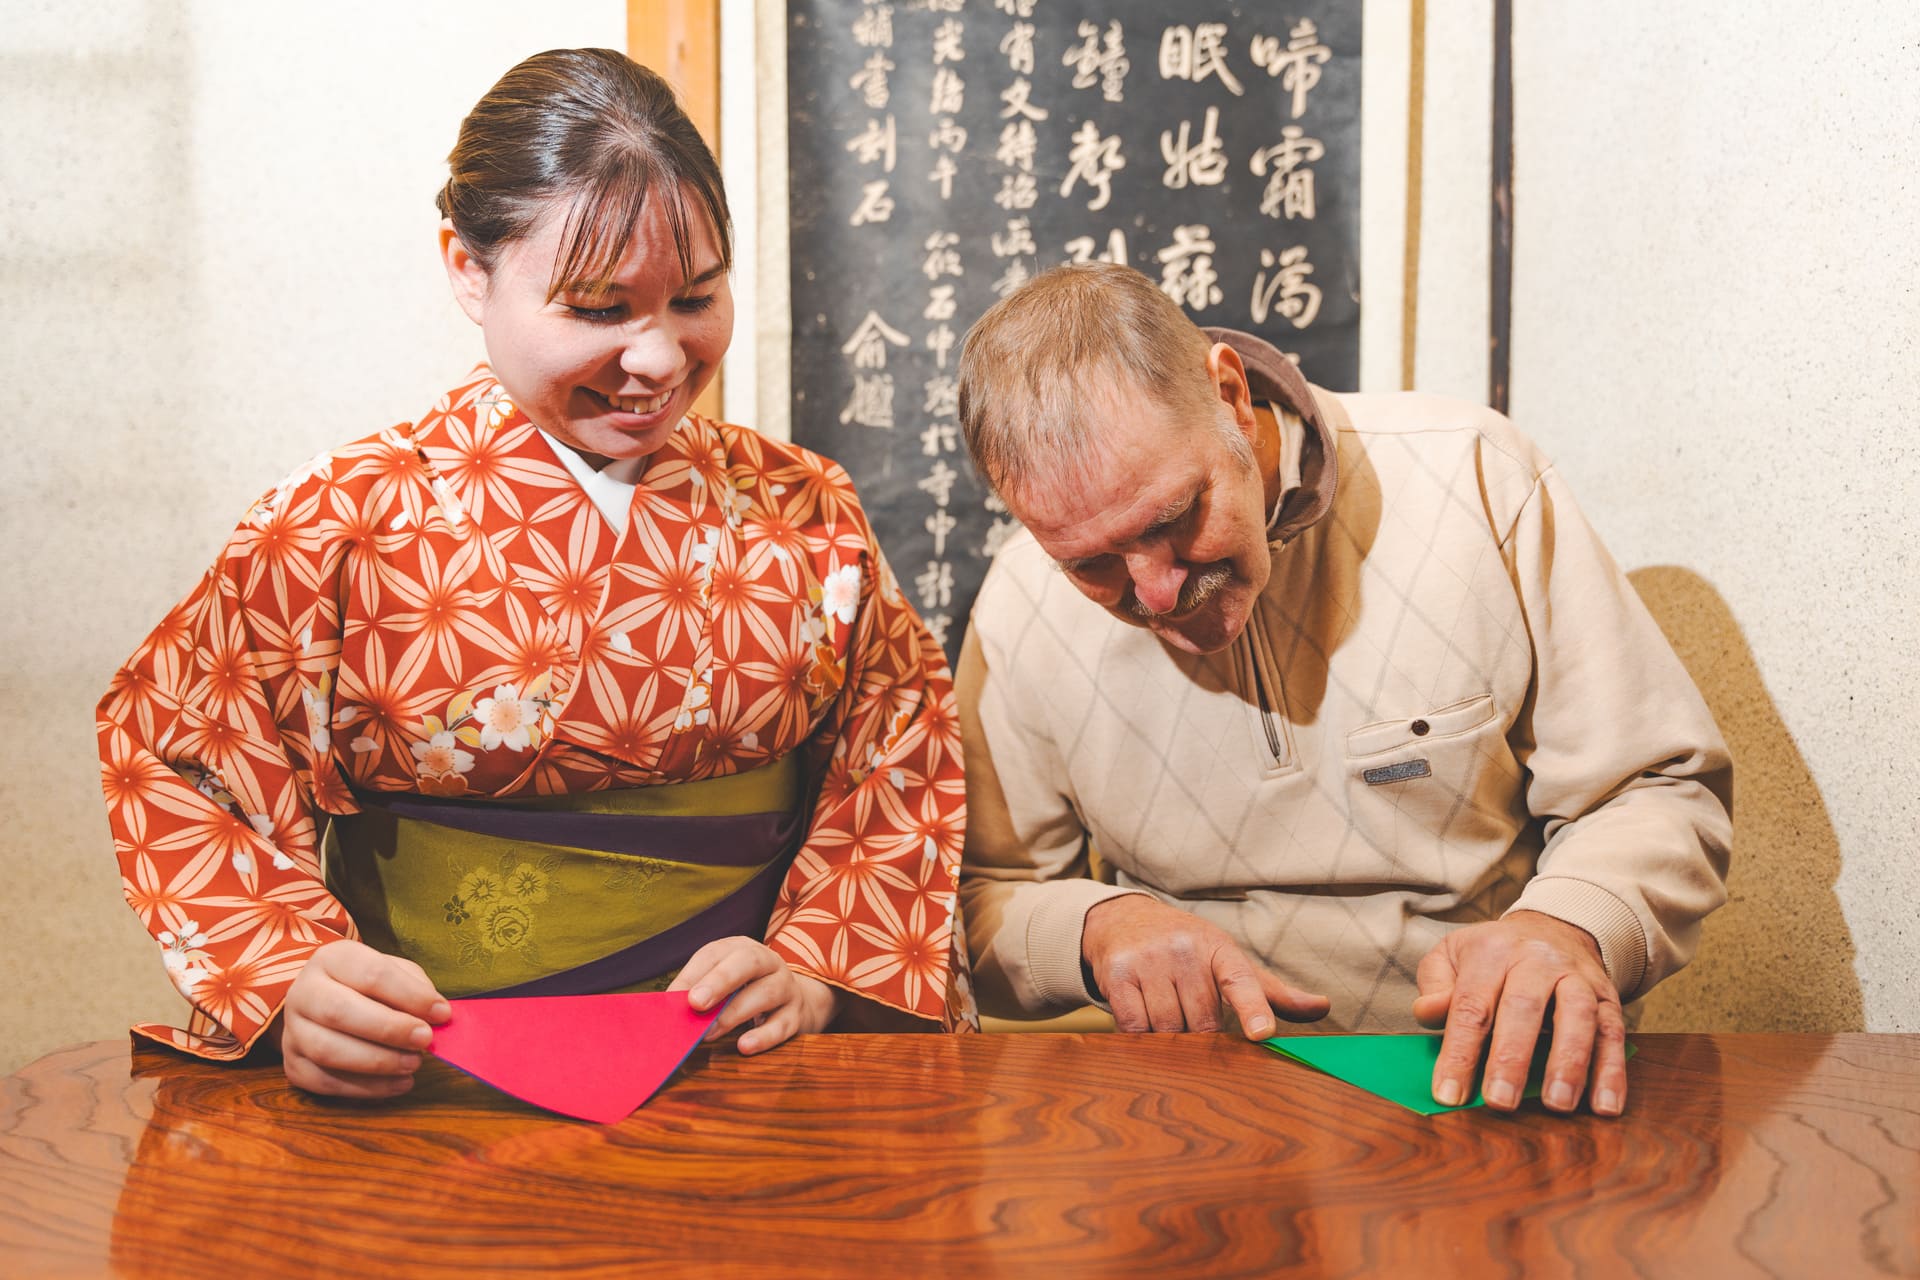 Japanese Cultural Experiences at Kyoto Abeya. A woman in a kimono and a man in a sweater creating origami, focused on their hands as they fold colorful paper, with Japanese calligraphy visible in the background.